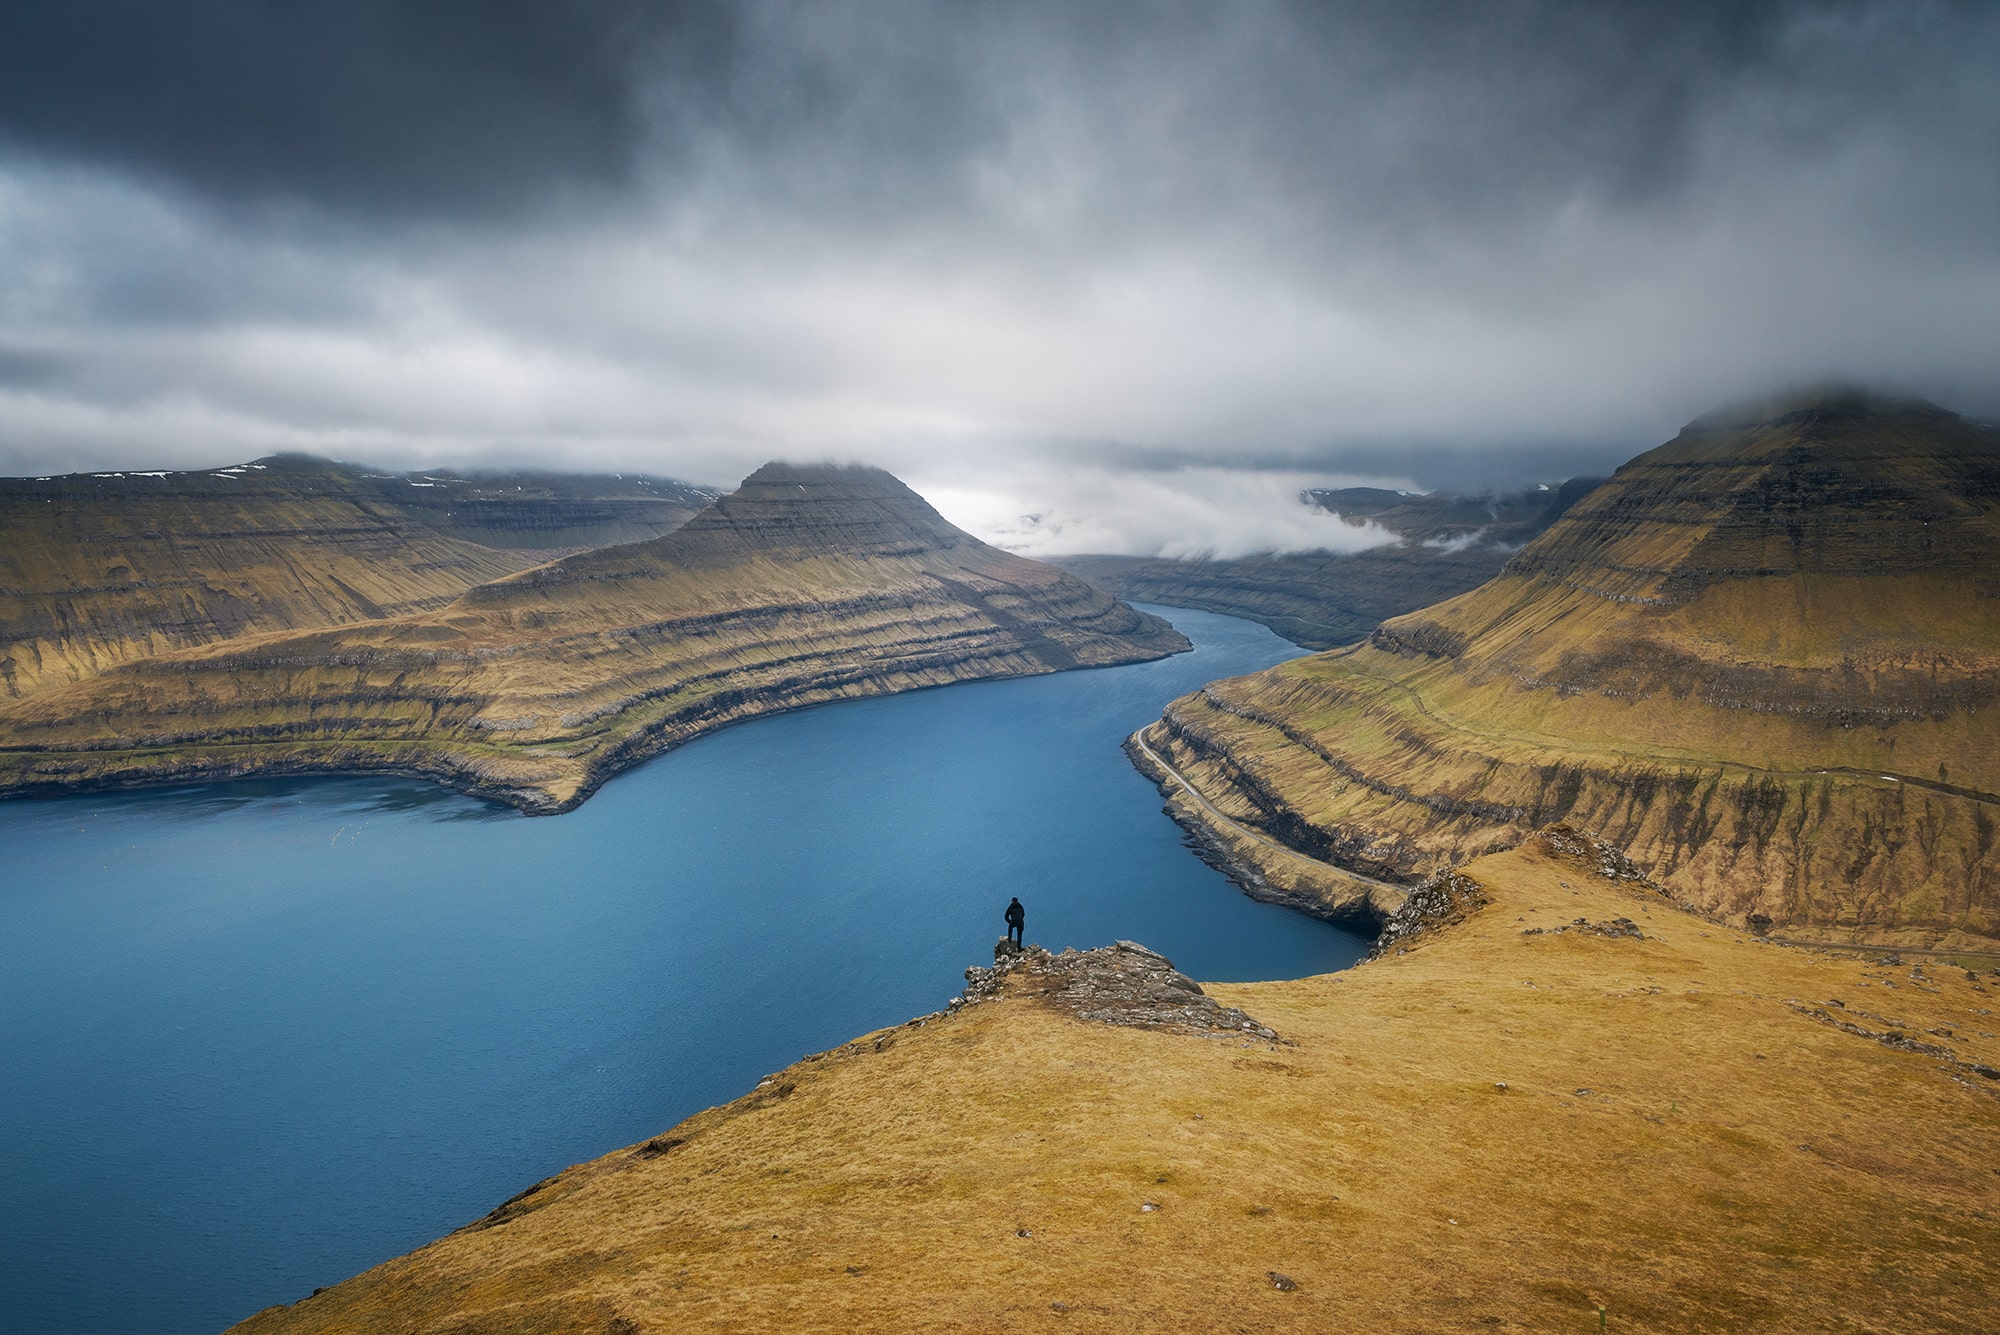 Immerse yourself in the breathtaking landscapes of the Faroe Islands with this captivating landscape photograph captured by Jennifer Esseiva and her Nikon D810. Witness the awe-inspiring scene as a man stands on the edge of a cliff, admiring the dramatic beauty of the Faroe Islands. This striking image captures the rugged charm and untamed wilderness of the archipelago's landscapes, inviting viewers to explore its serene allure. Experience the magic of Faroese scenery through Jennifer Esseiva's lens, where every frame tells a story of nature's grandeur. Discover the timeless beauty of the Faroe Islands in this evocative landscape photograph.